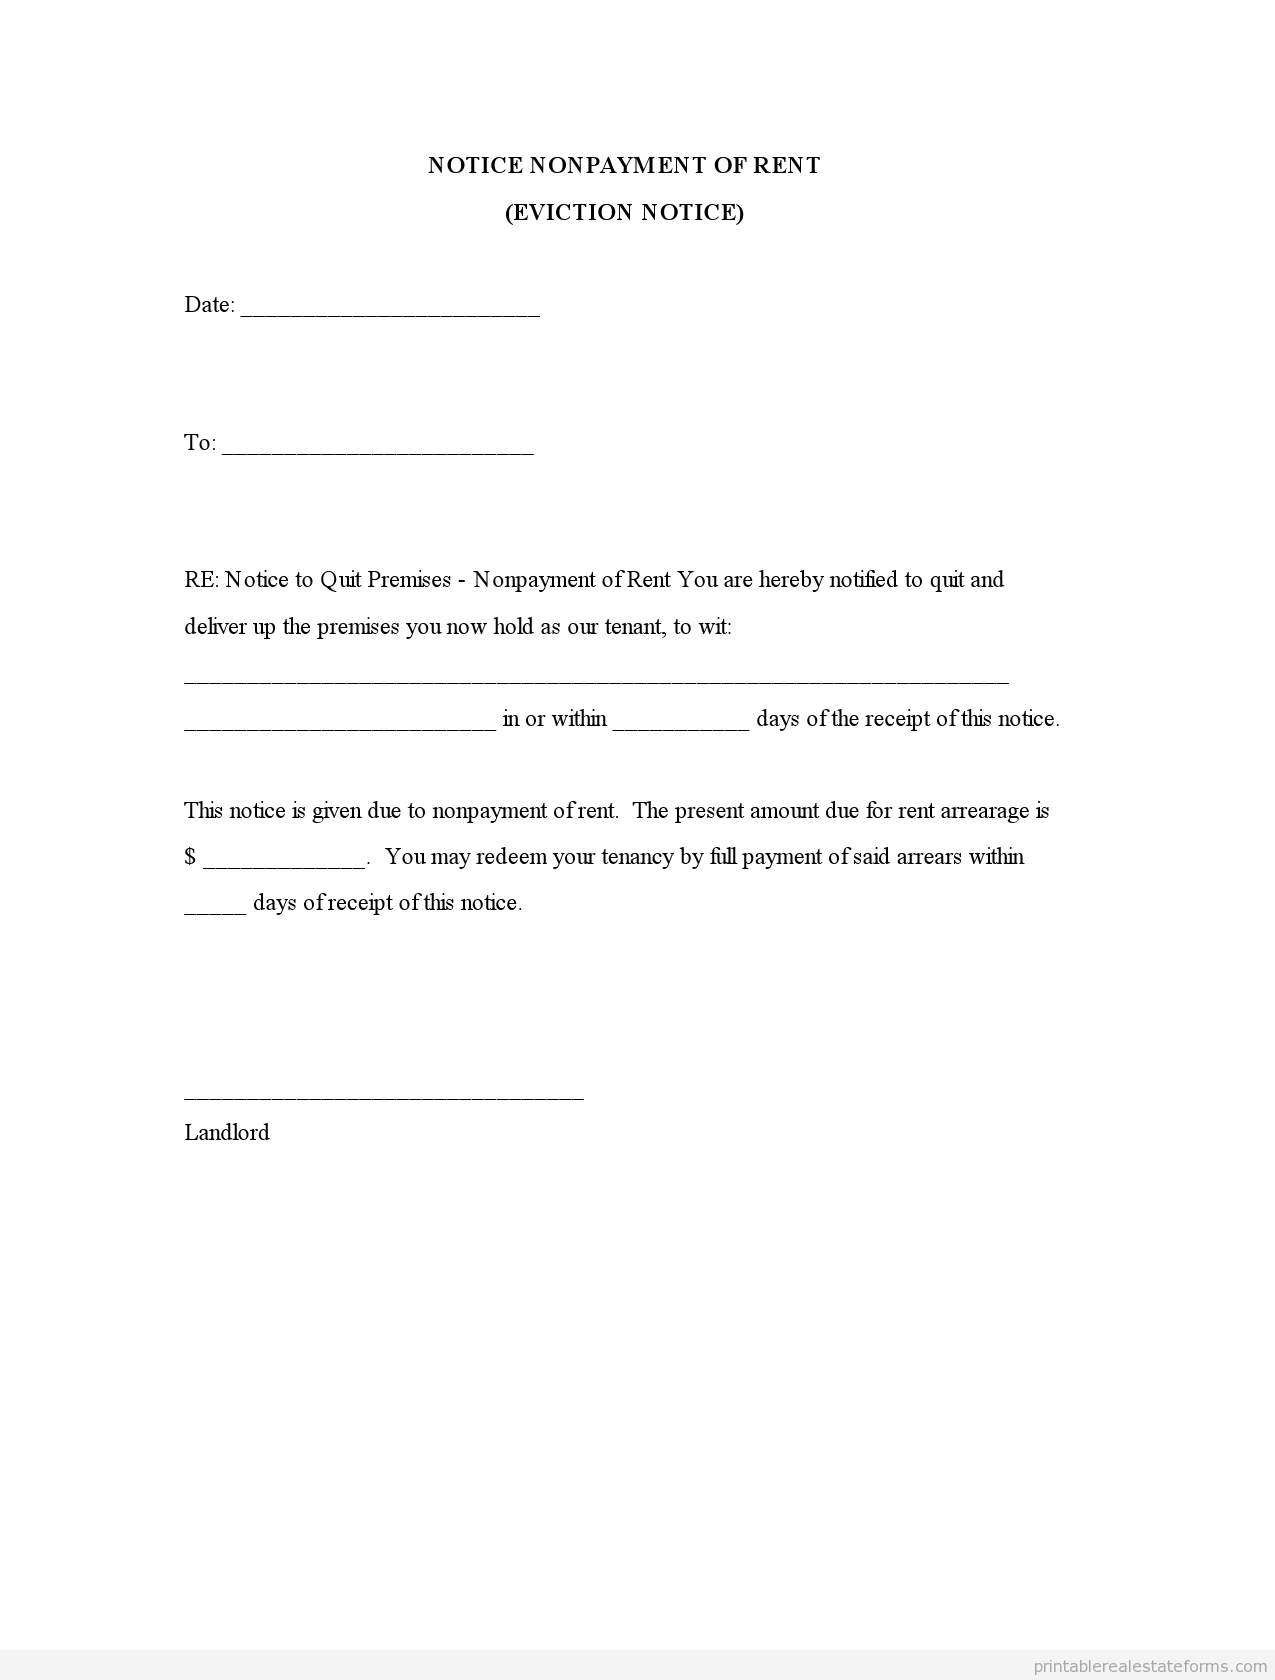 Free Printable Eviction Notice Form Sample Template